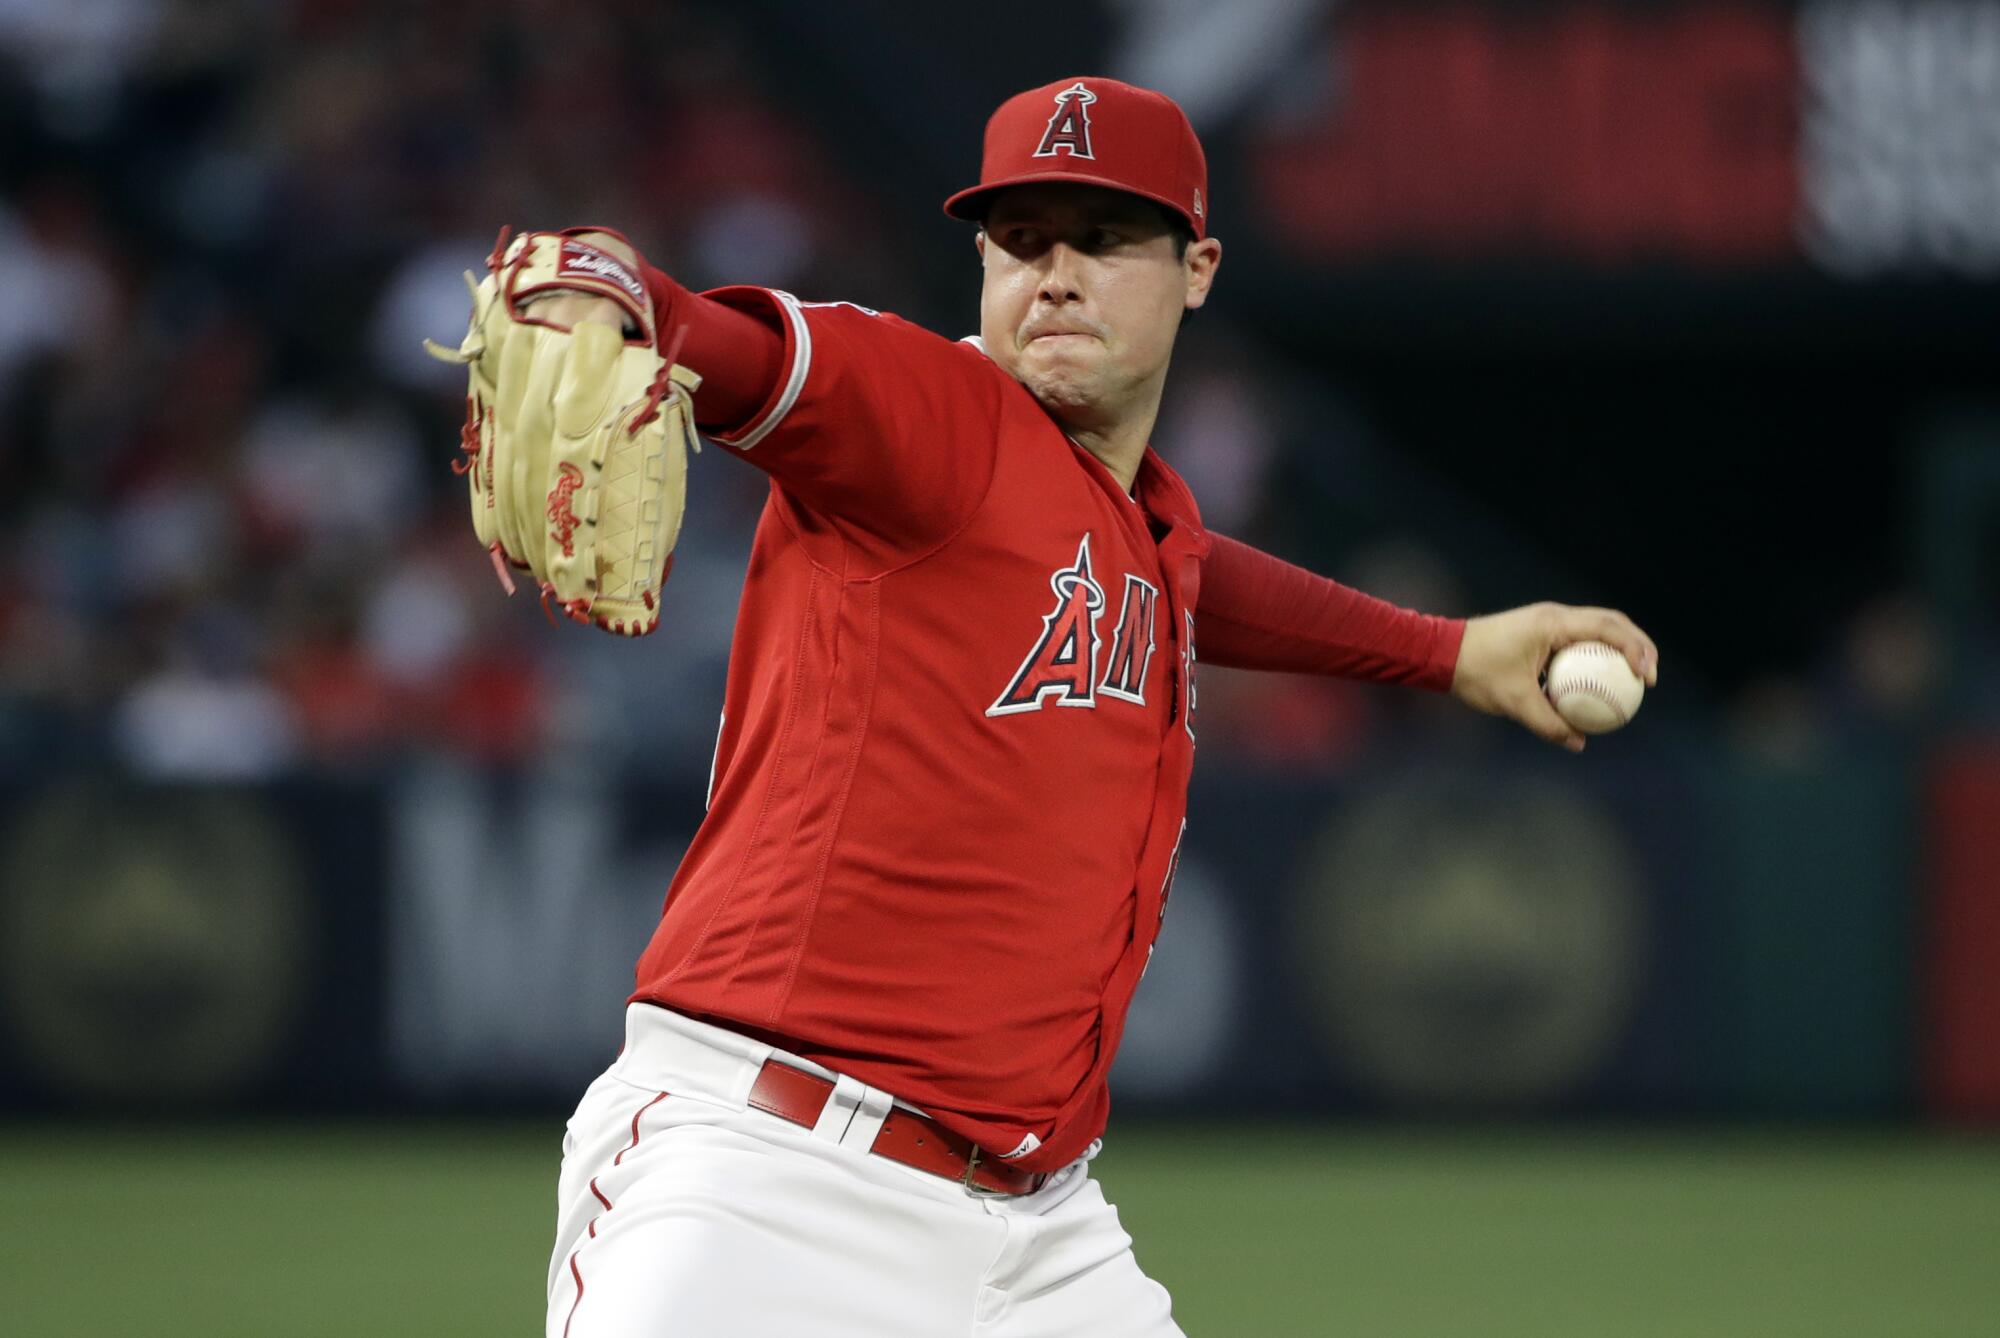 Angels left-hander Tyler Skaggs pitches with a red uniform and Rawlings baseball glove